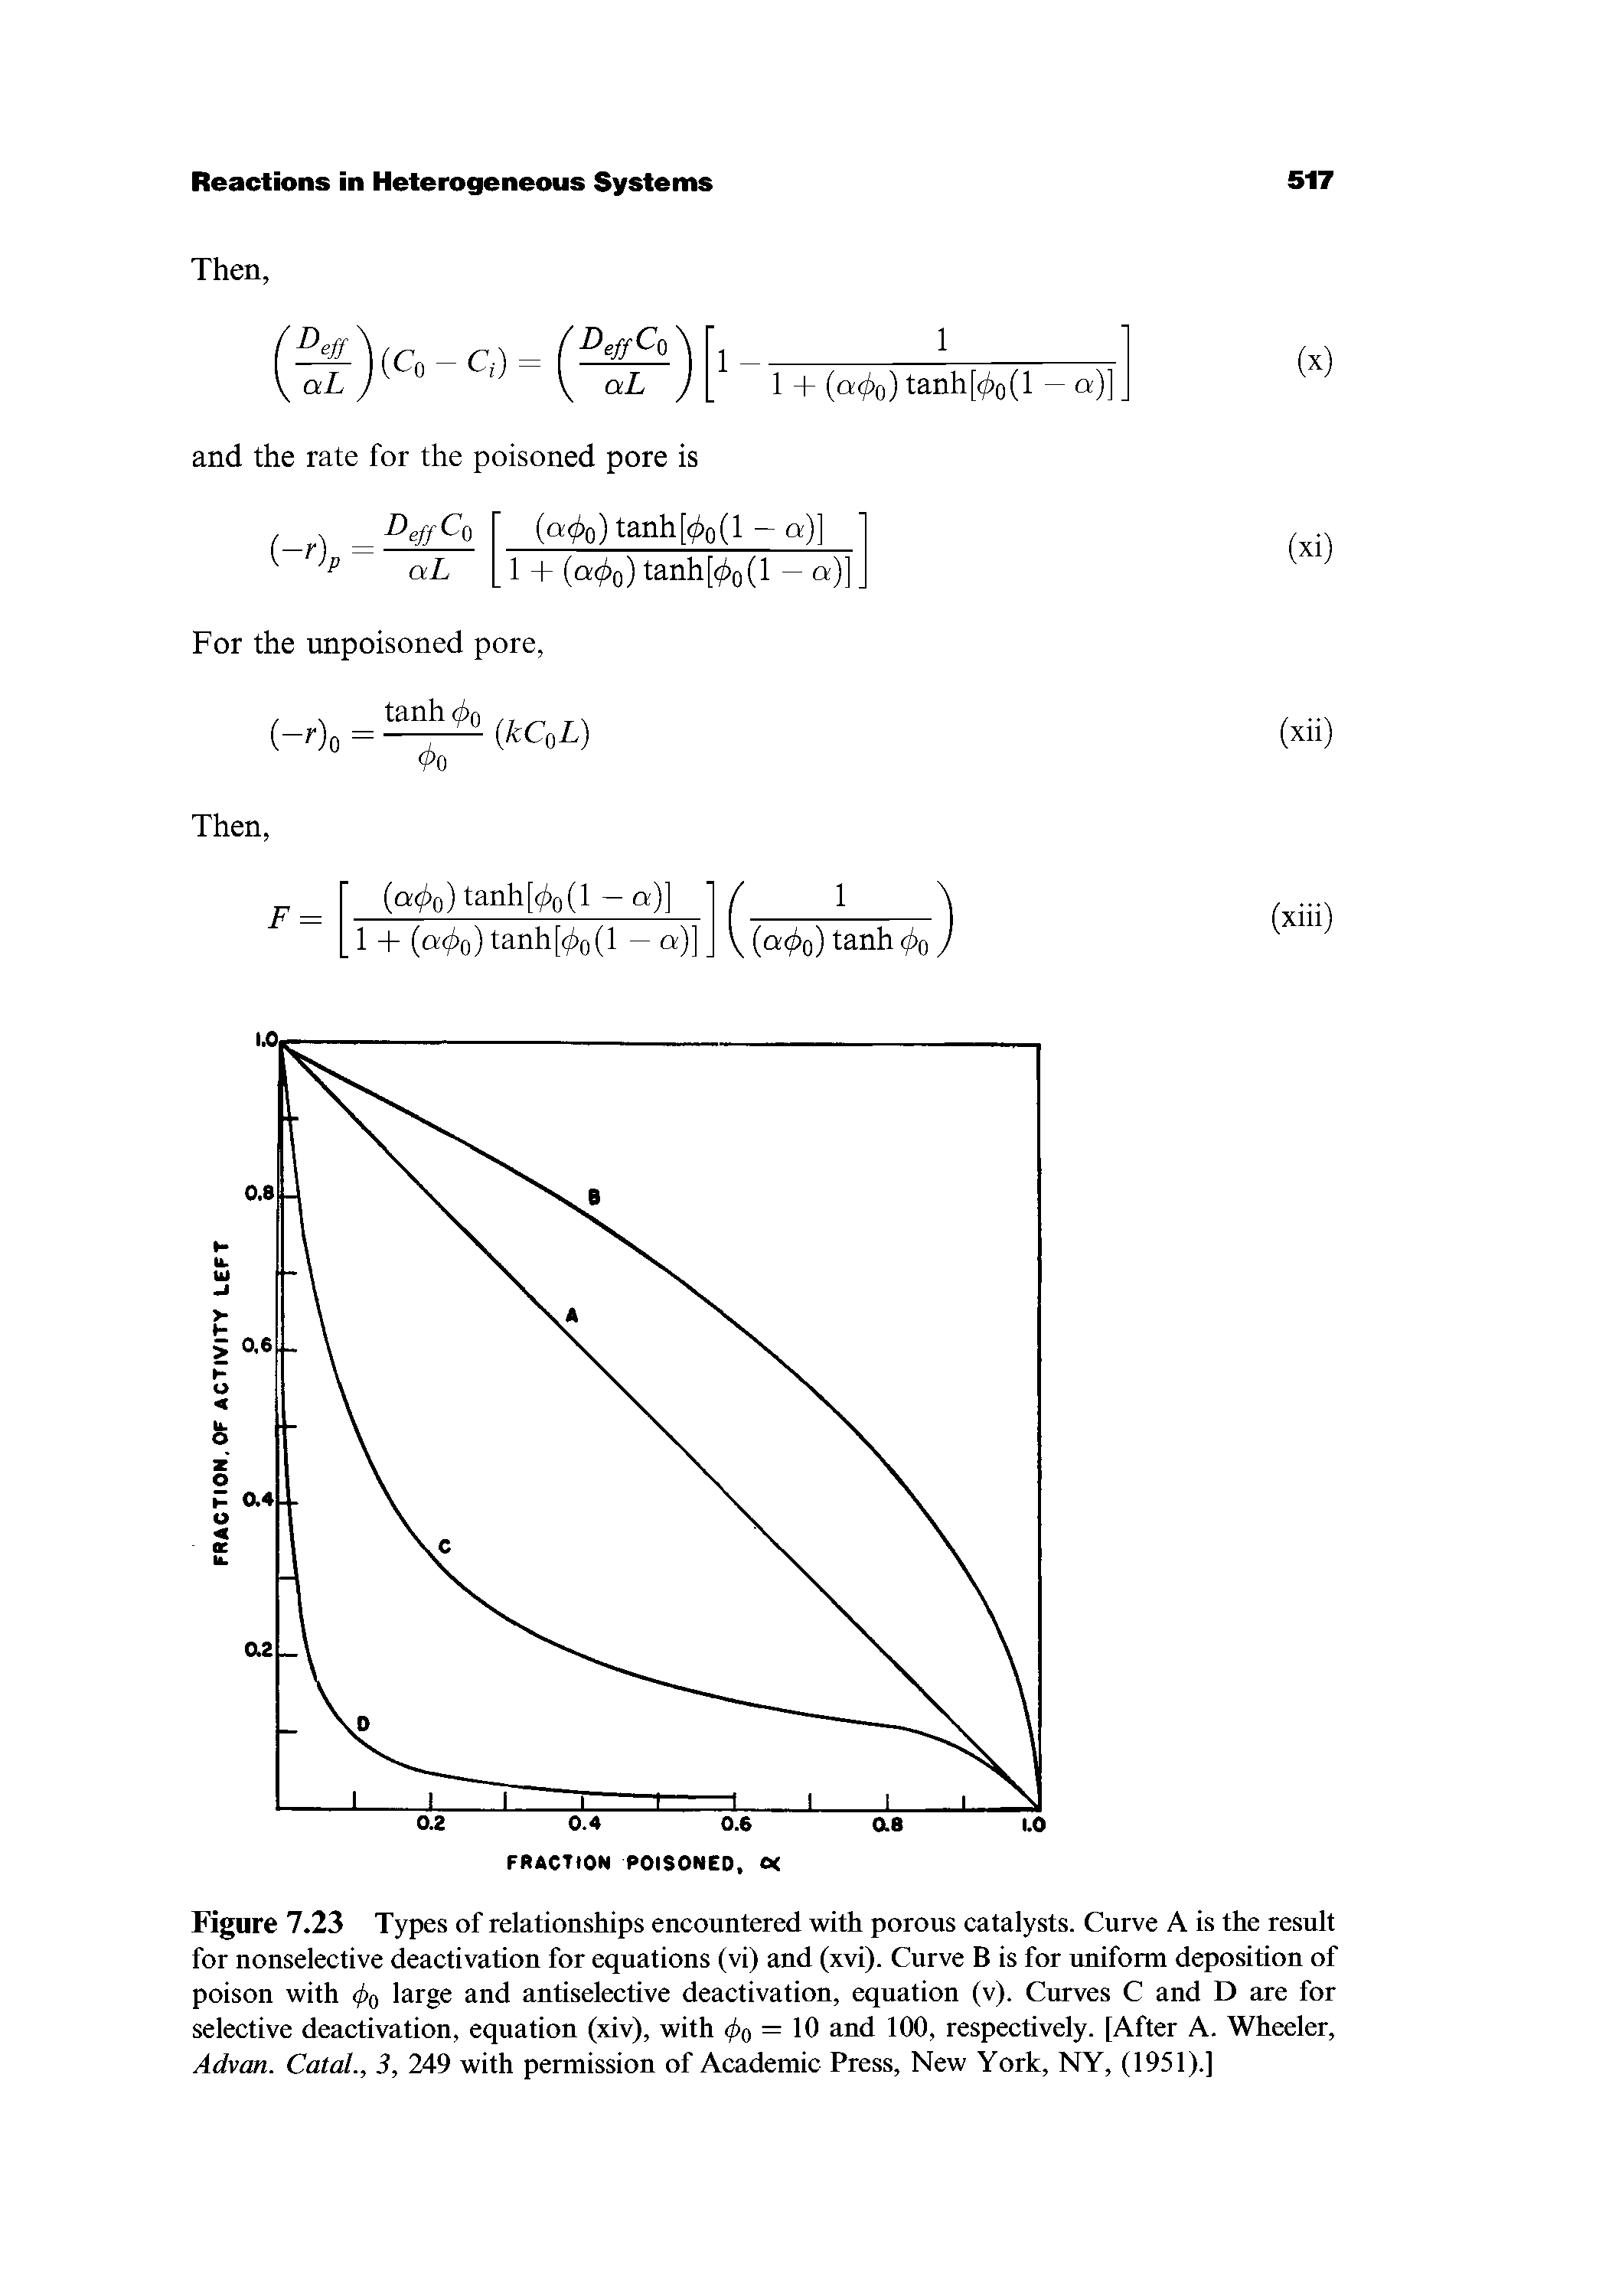 Figure 7.23 Types of relationships encountered with porous catalysts. Curve A is the result for nonselective deactivation for equations (vi) and (xvi). Curve B is for uniform deposition of poison with (po large and antiselective deactivation, equation (v). Curves C and D are for selective deactivation, equation (xiv), with <j>Q = 10 and 100, respectively. [After A. Wheeler, Advan. Catal., 3, 249 with permission of Academic Press, New York, NY, (1951).]...